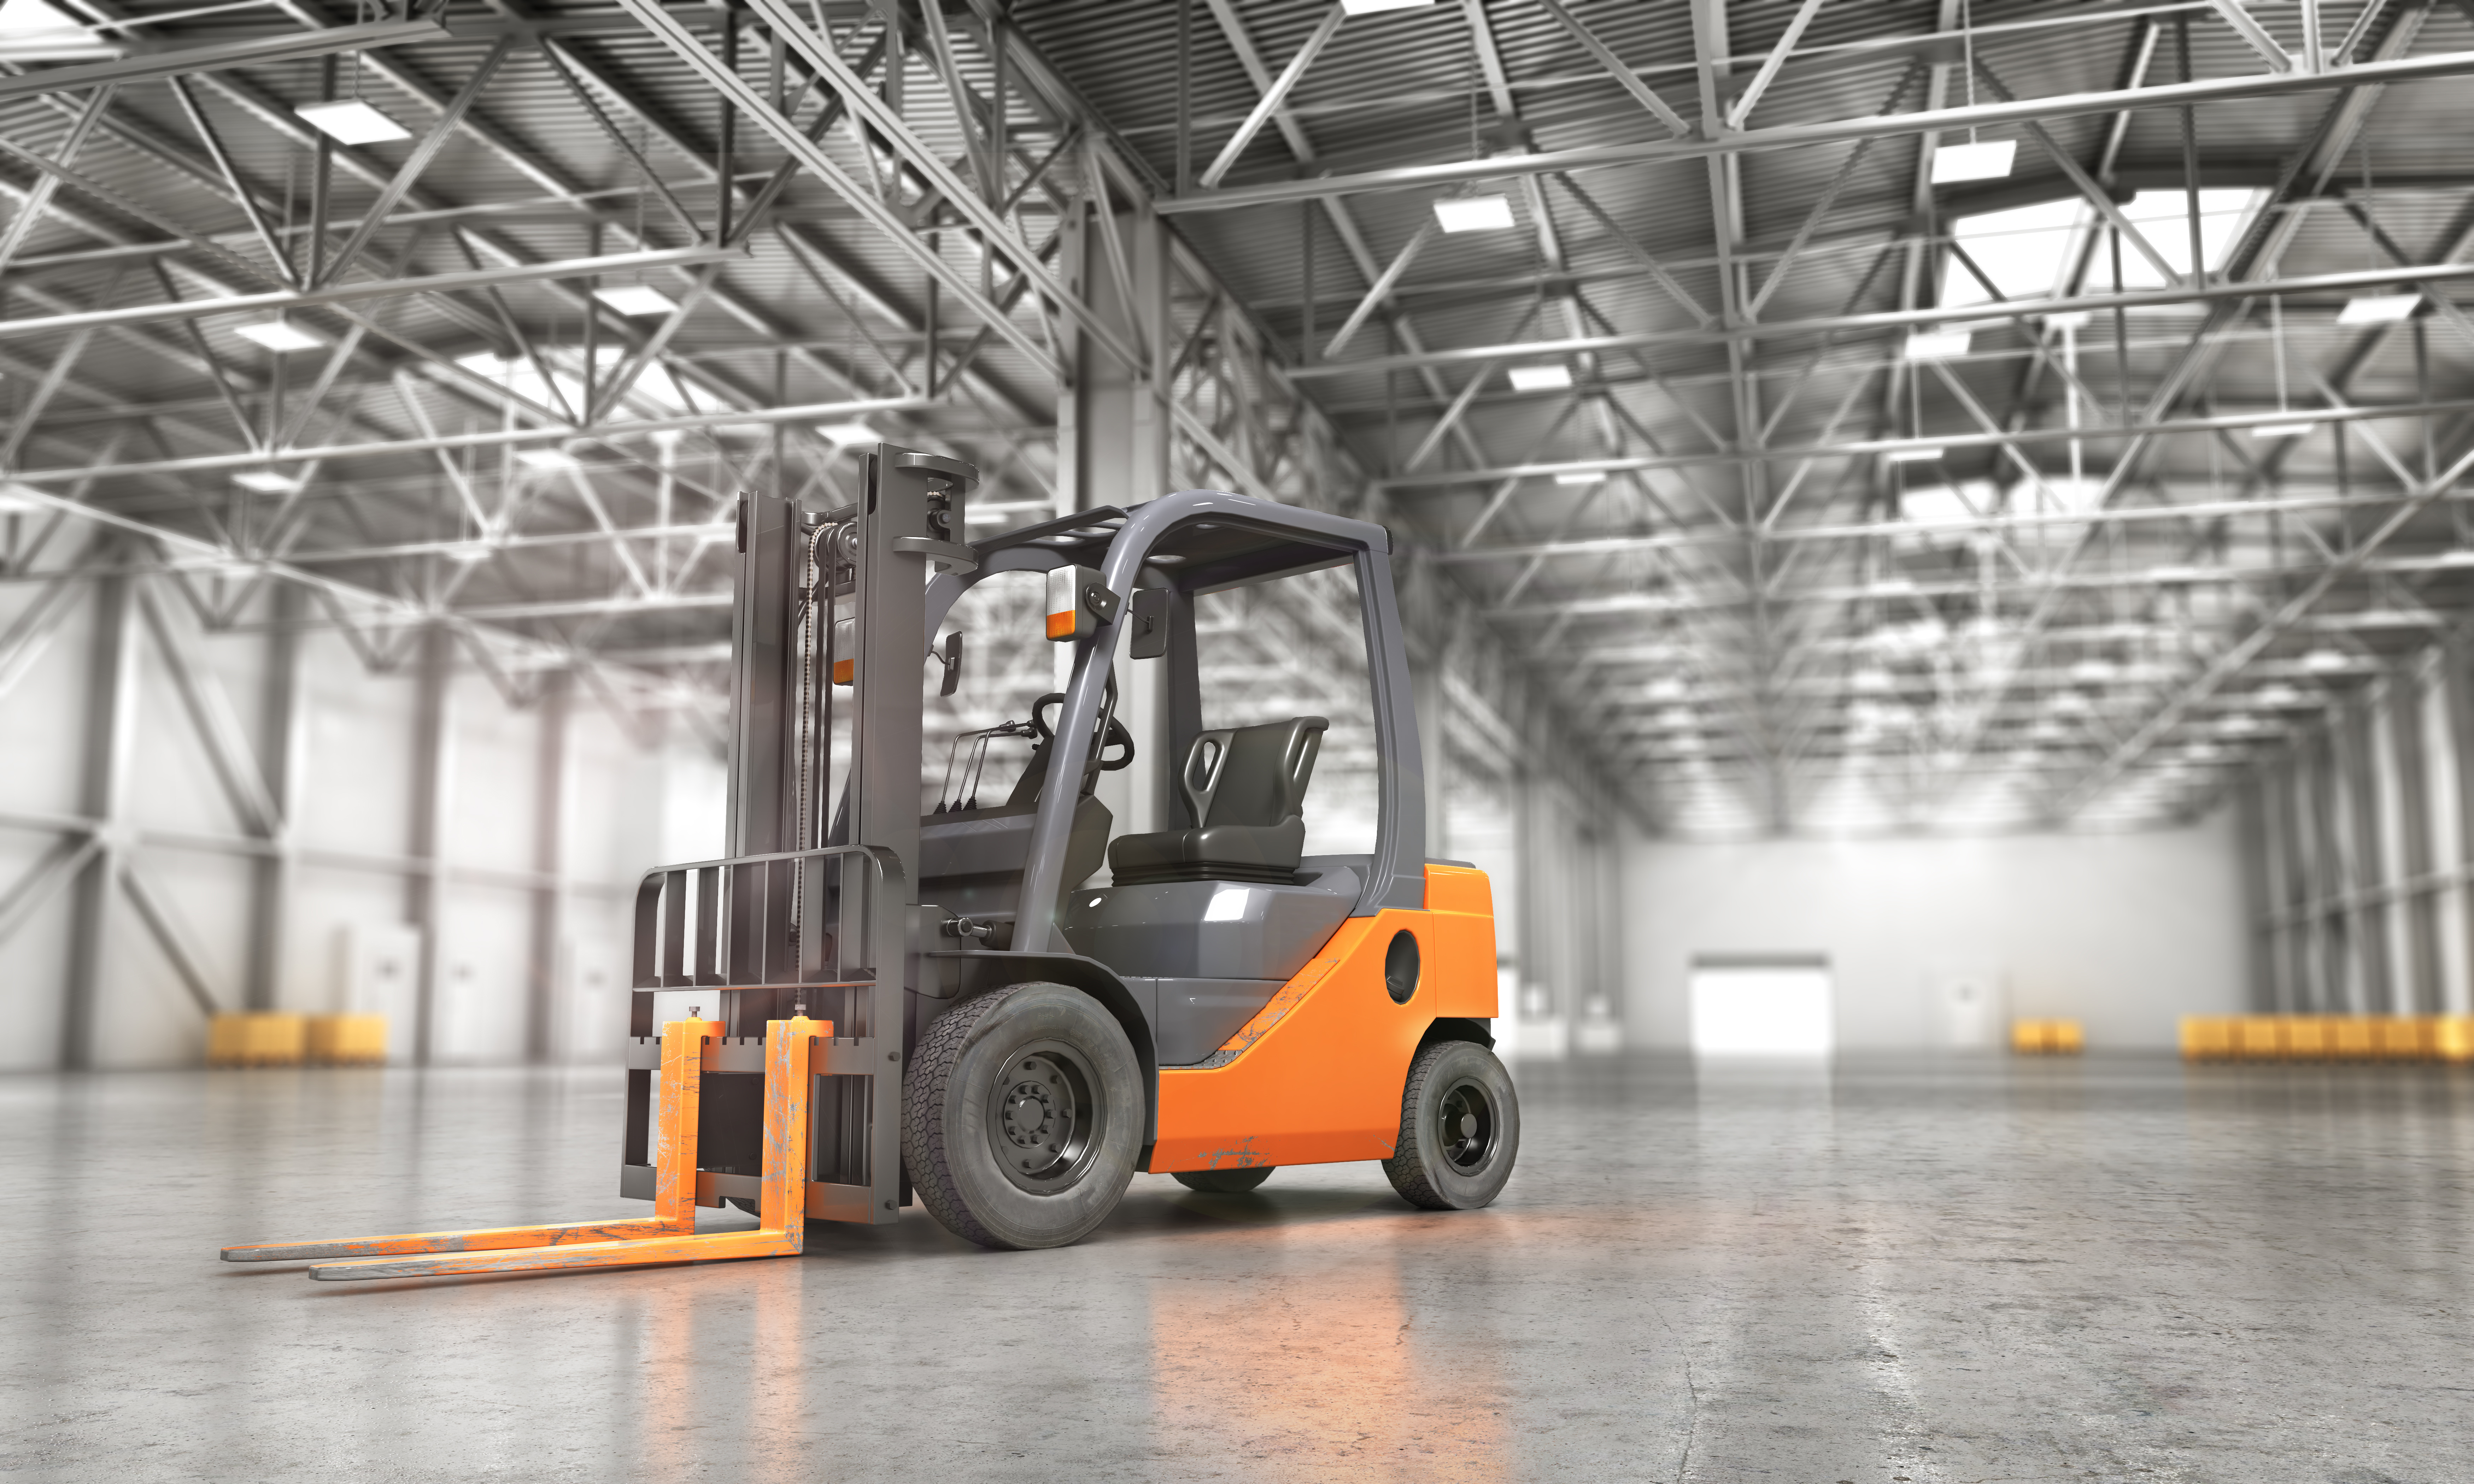 A Guide to Operating & Using a Forklift Truck